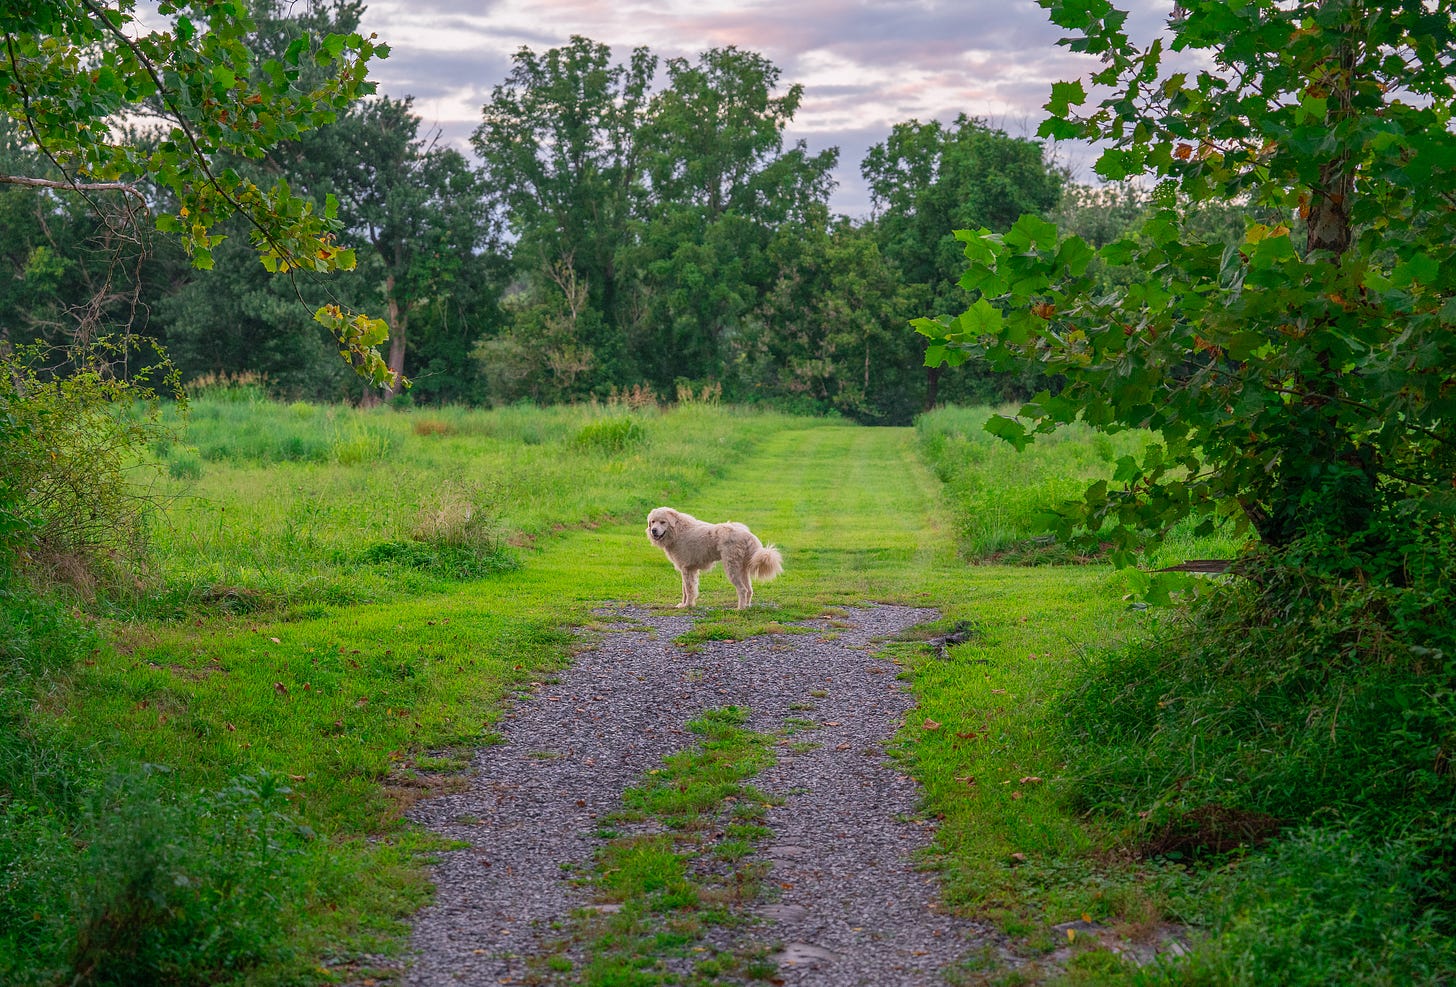 A golden retriever dog in a green field of grass surrounded by trees